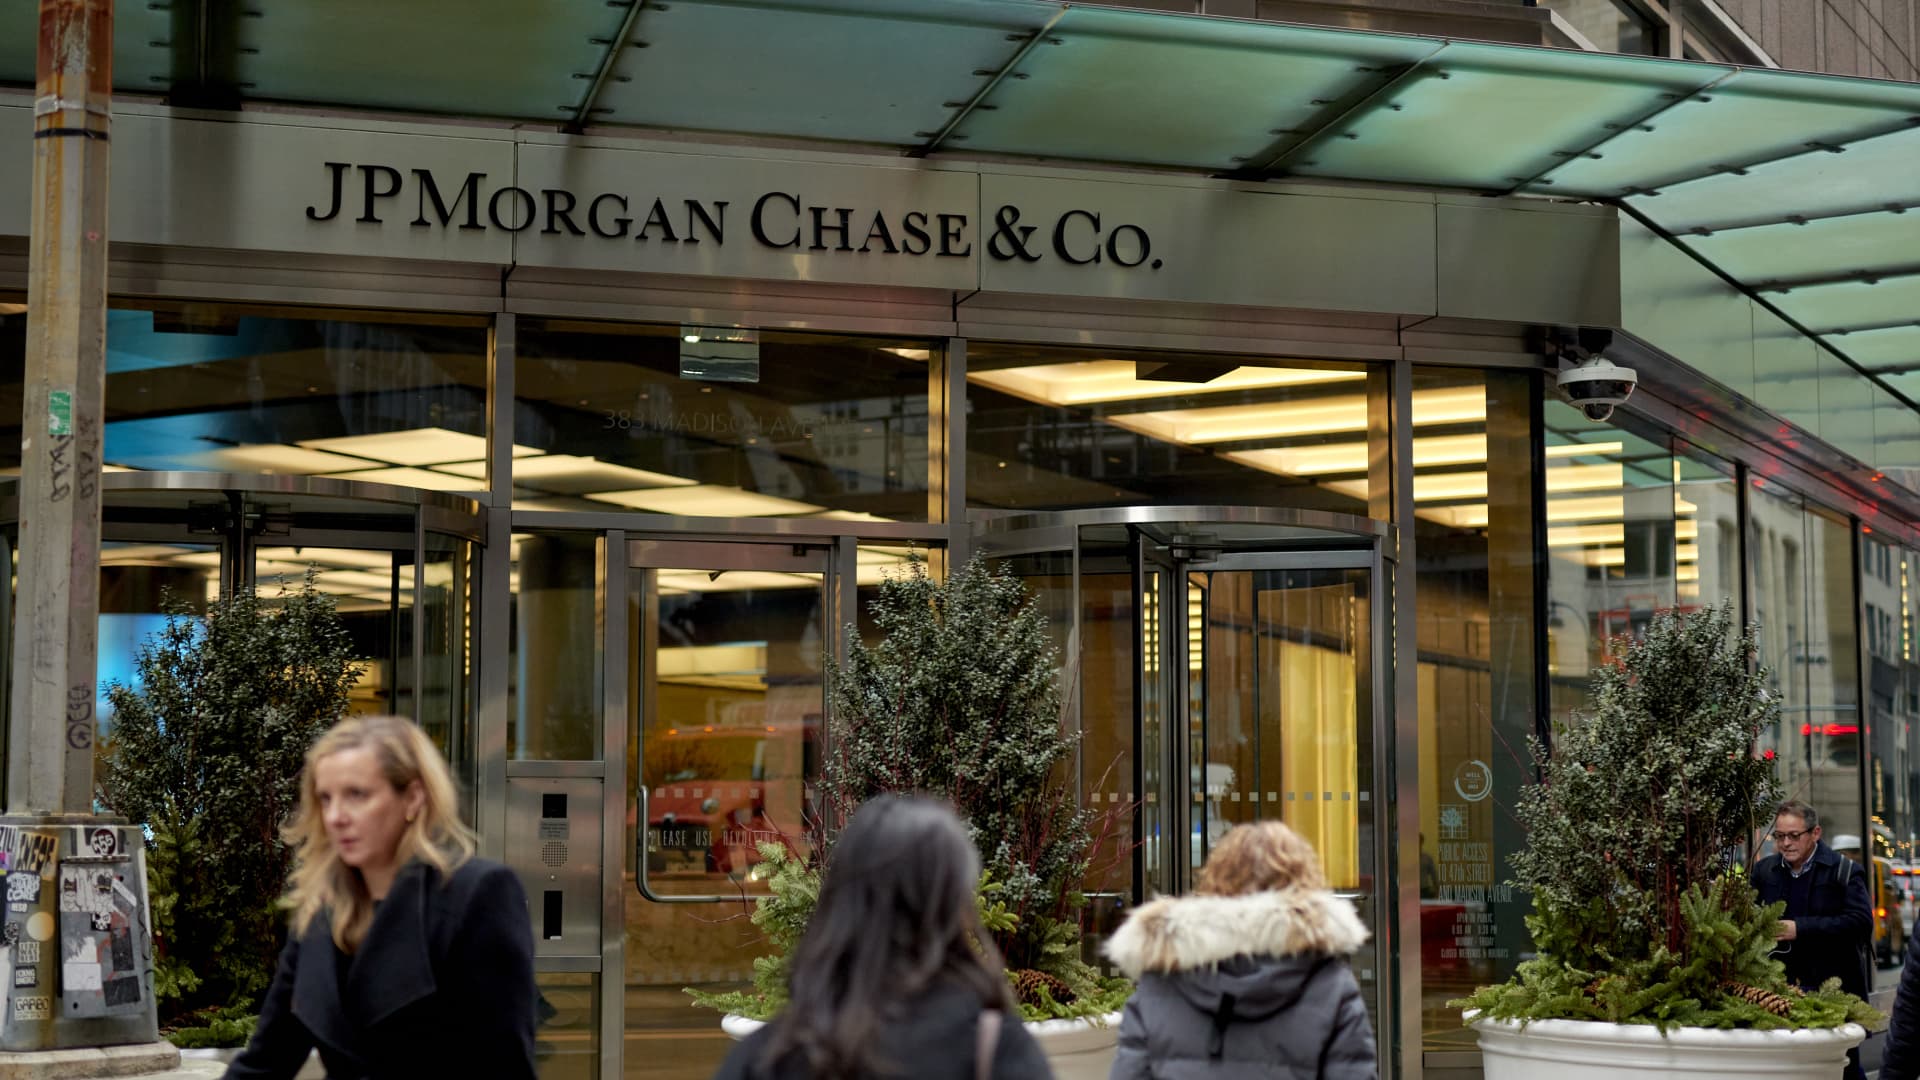 JPMorgan Chase cut about 500 jobs this week, including technology and operations roles